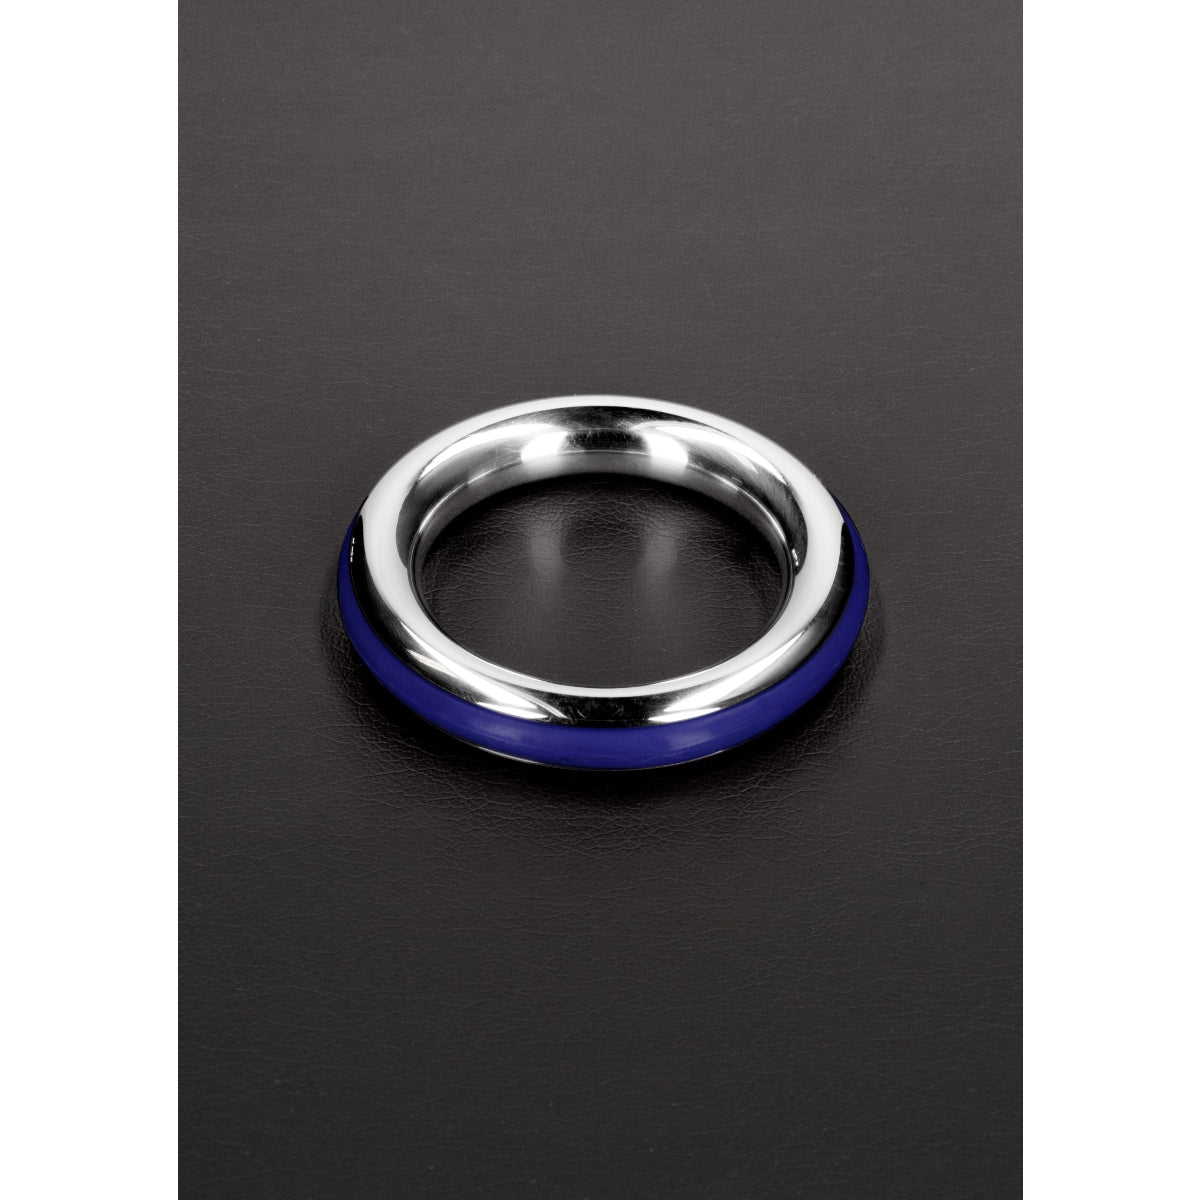 Shots Cazzo Tensions Stainless Steel Cock Ring Blue 40mm (8131770024175)